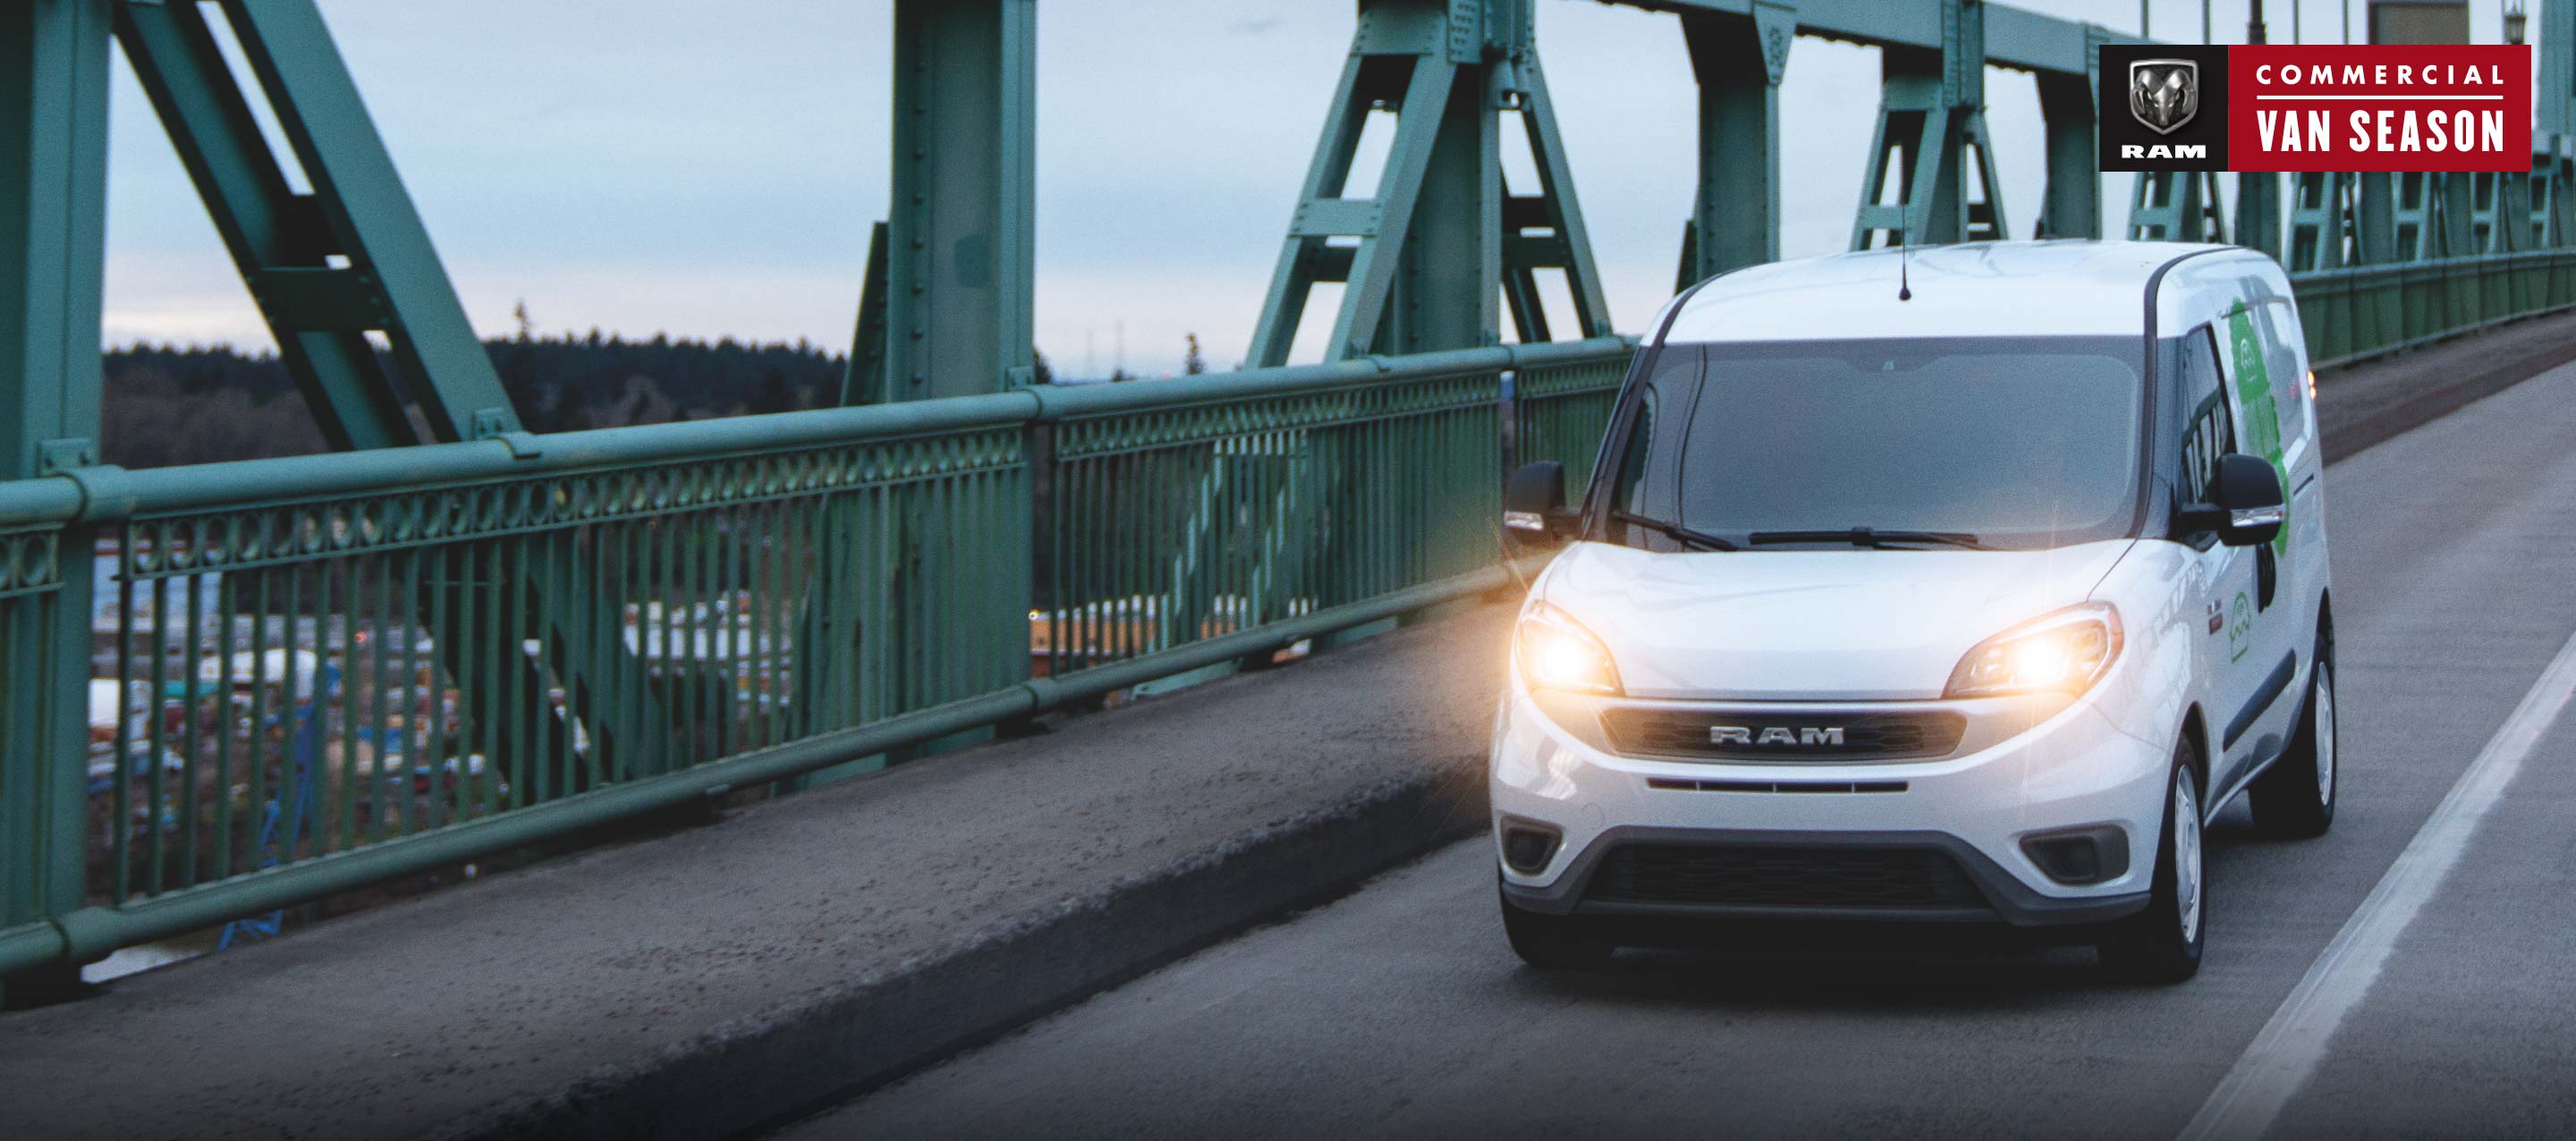 Ram Commercial Van season. A white 2022 Ram ProMaster City Cargo Van being driven across a bridge with its headlamps on.